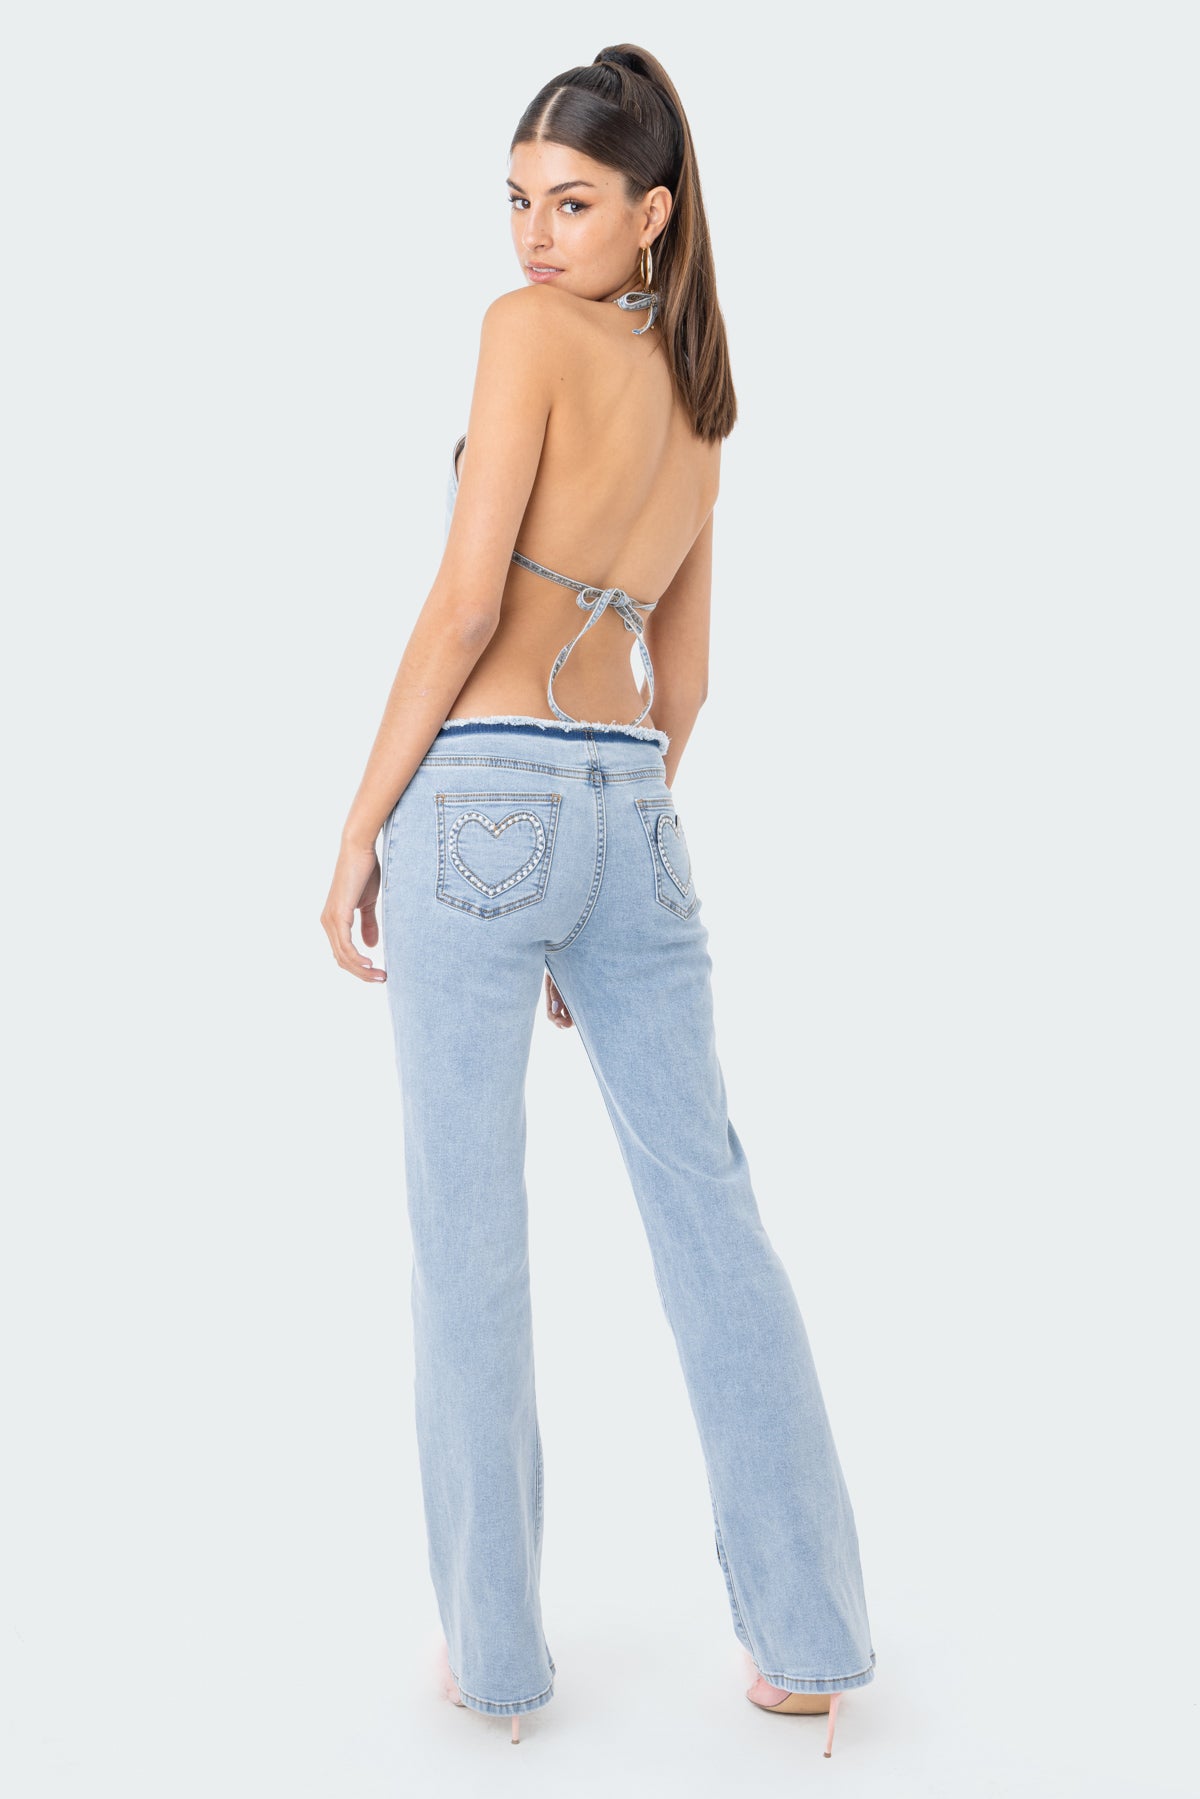 Pearly Heart Denim Top